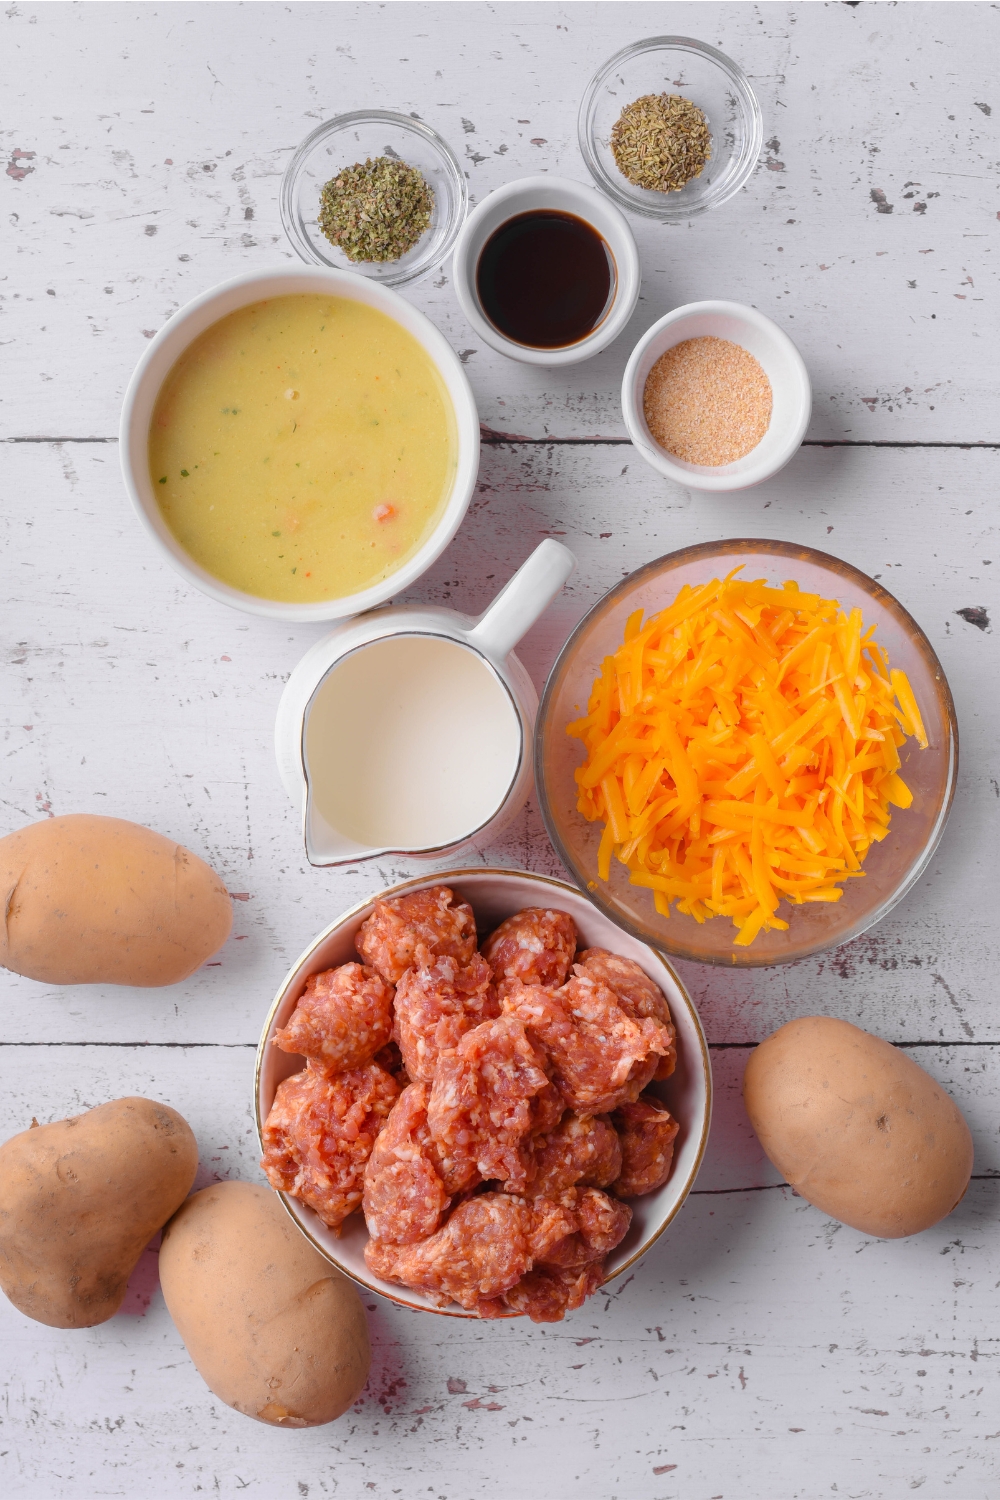 An assortment of ingredients including bowls of raw sausage, shredded cheese, cream of mushroom soup, spices, herbs, a pitcher of milk, and four potatoes on the counter.